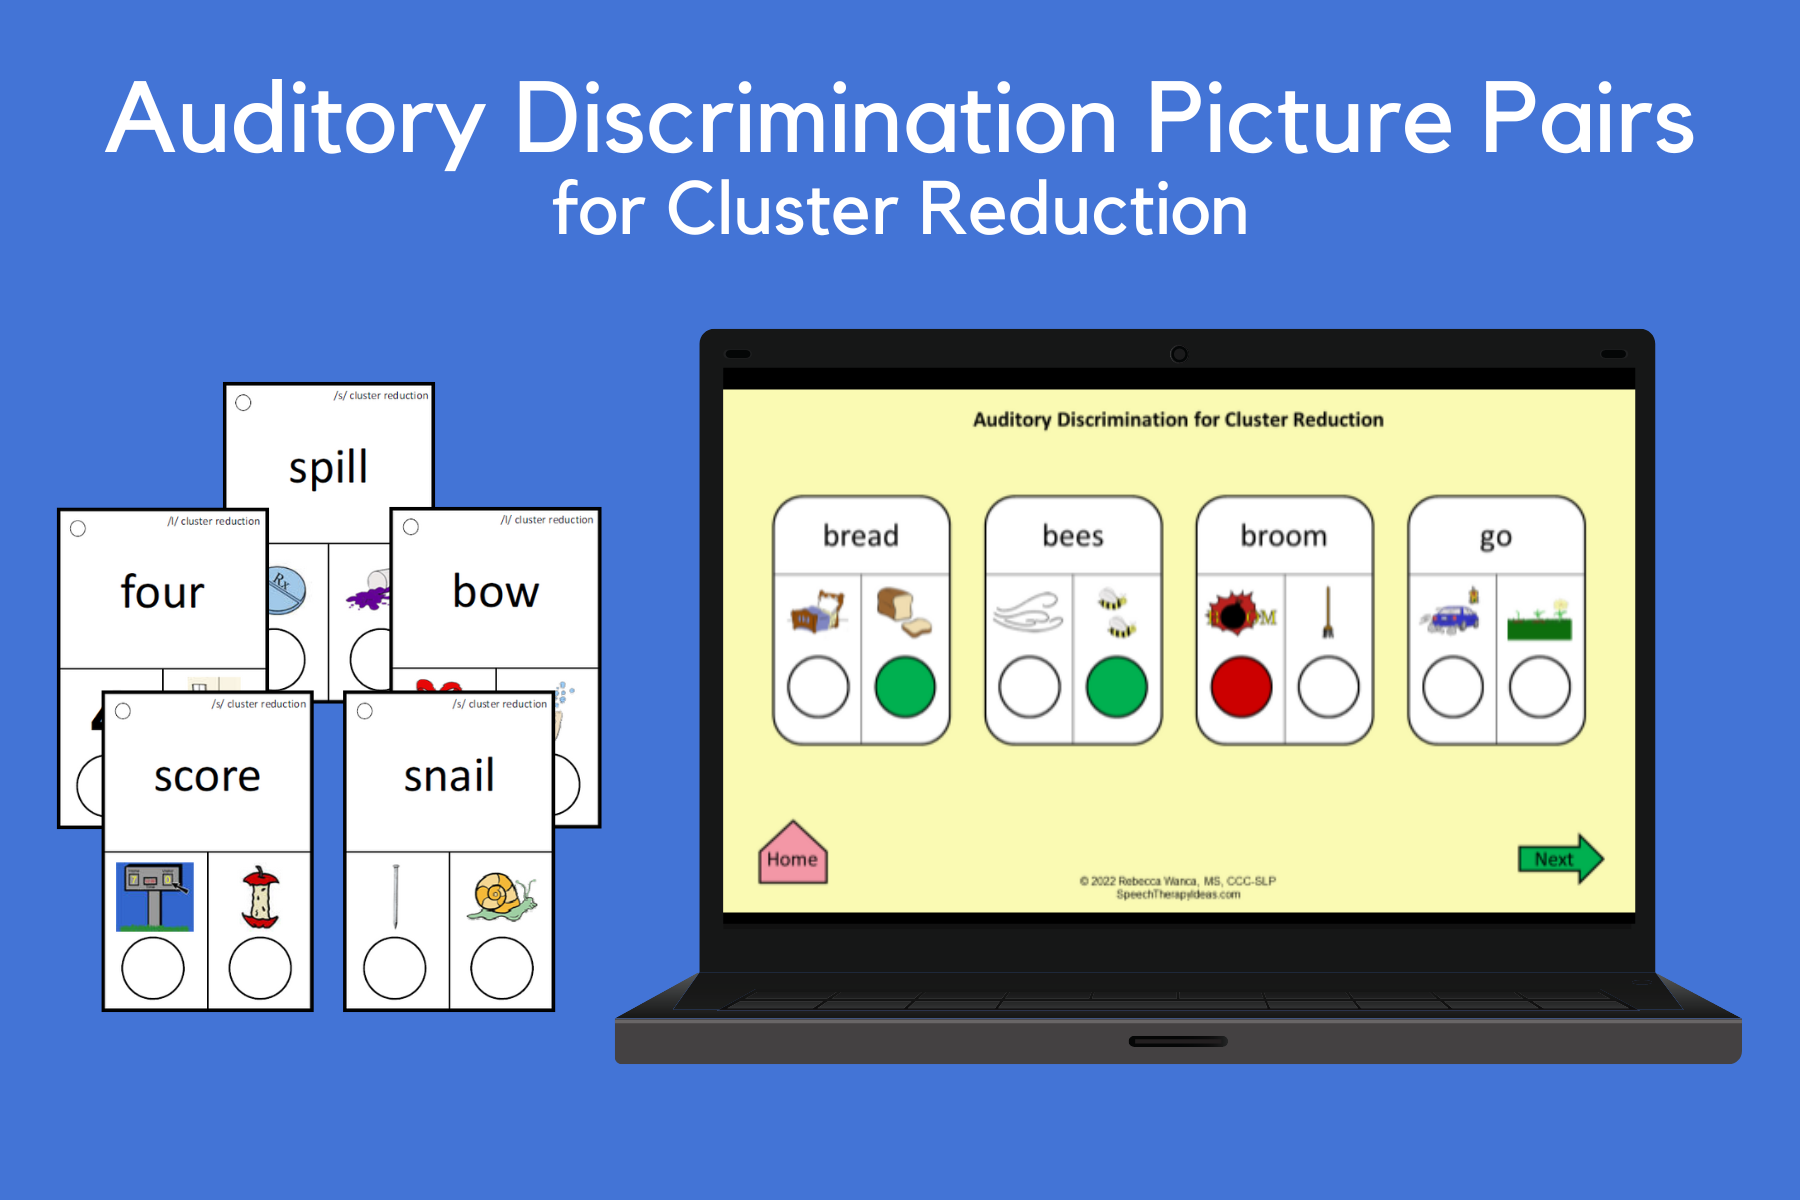 Auditory Discrimination Picture Pairs for Cluster Reduction